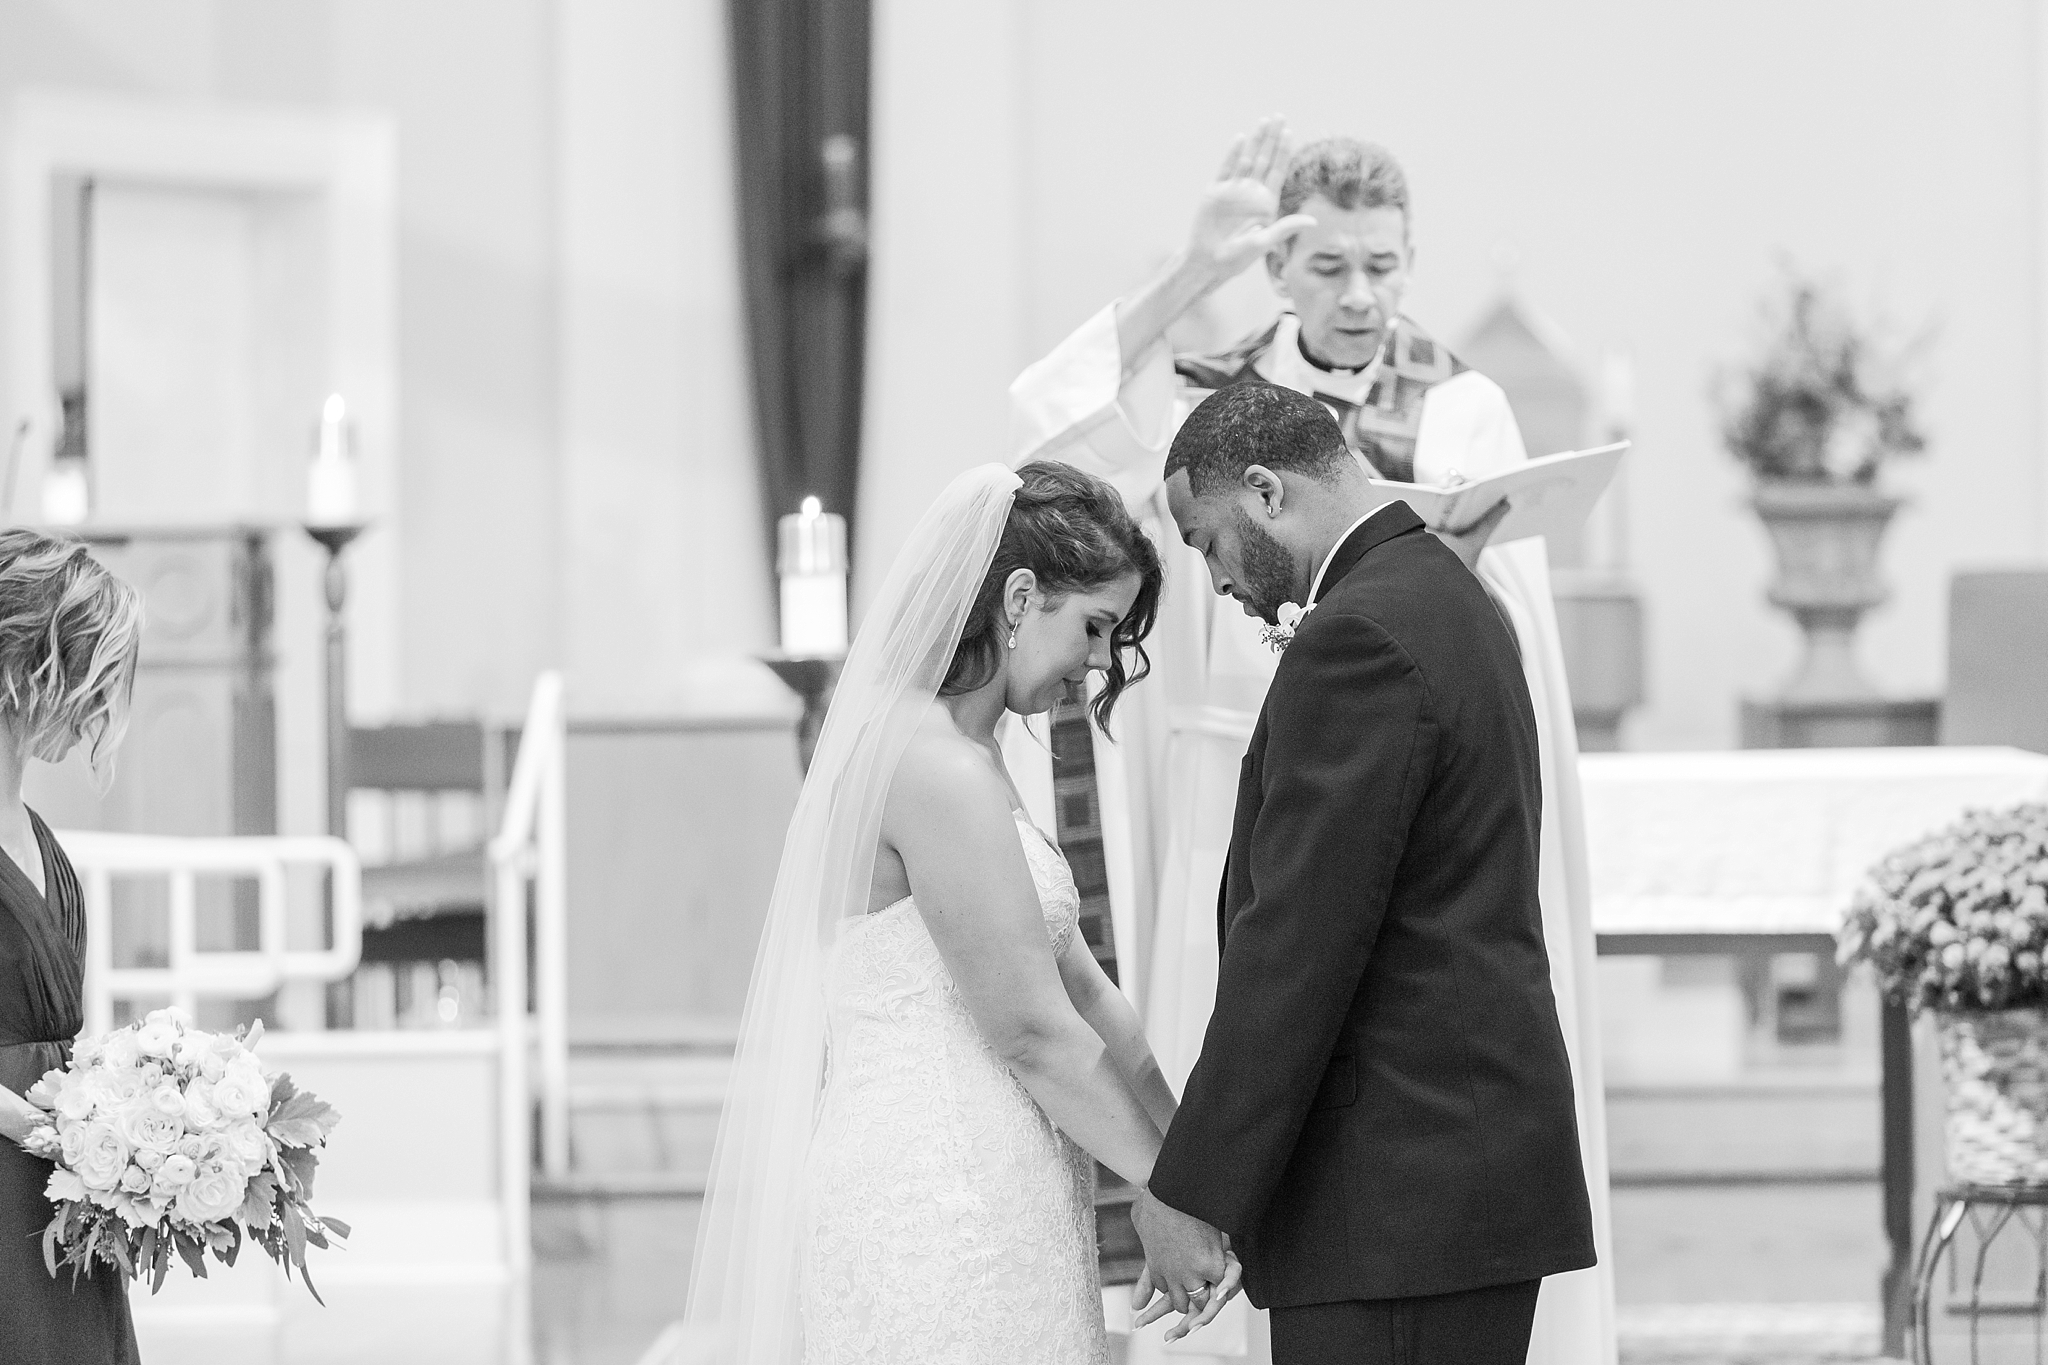 romantic-artful-candid-wedding-photos-in-detroit-lansing-ann-arbor-northern-michigan-and-chicago-by-courtney-carolyn-photography_0015.jpg